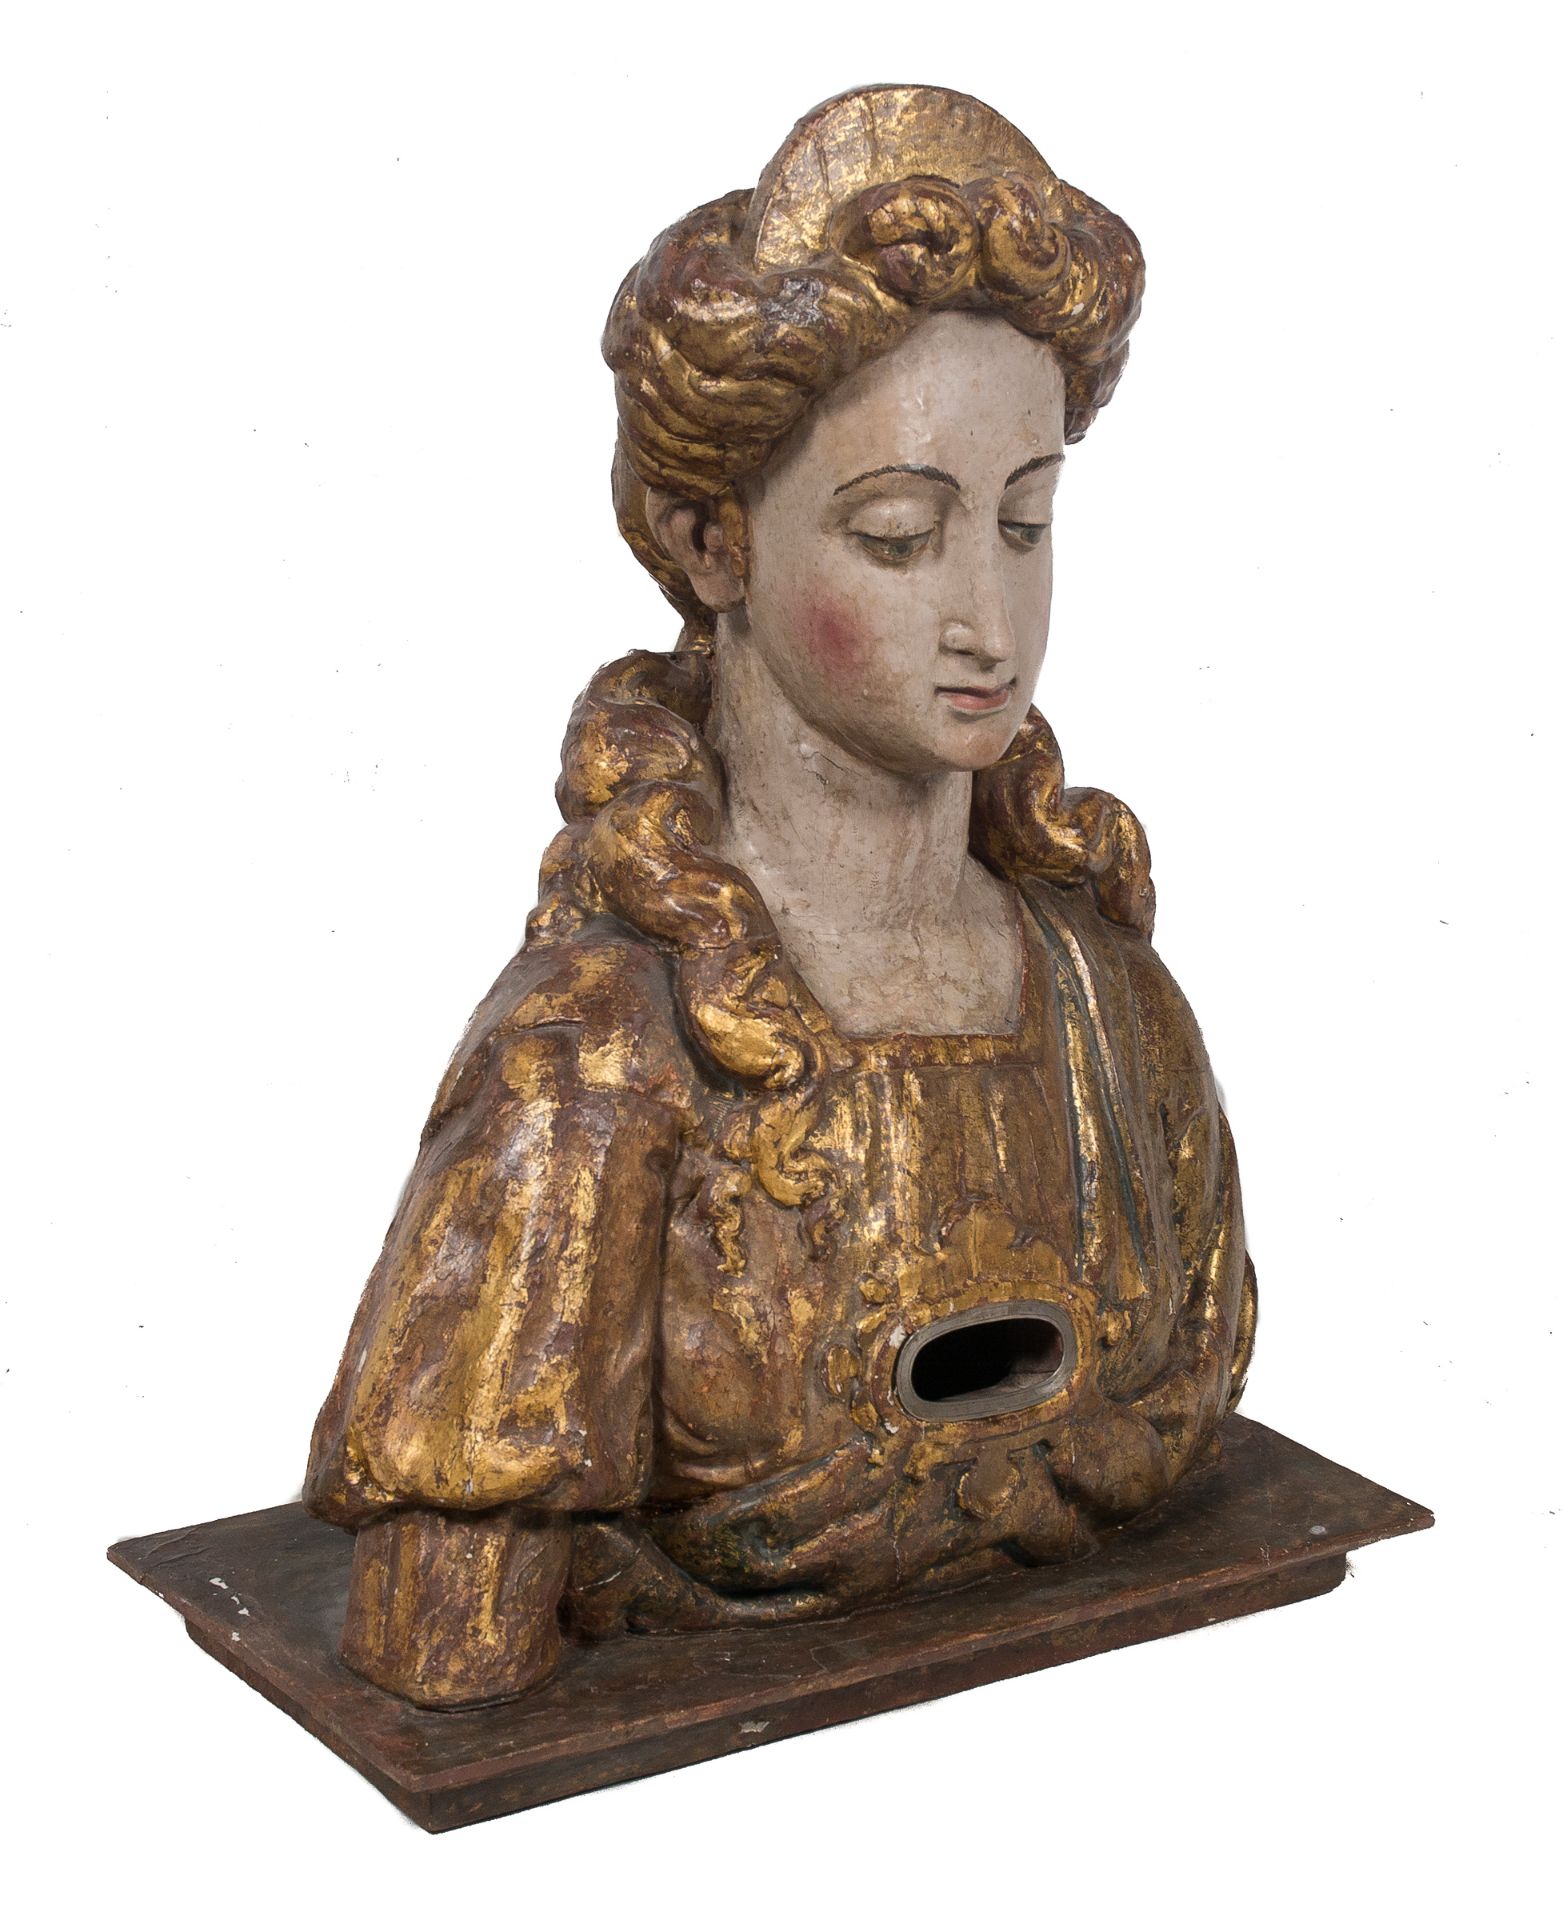 Carved, gilded and polychromed wooden reliquary. 16th century. - Image 2 of 4